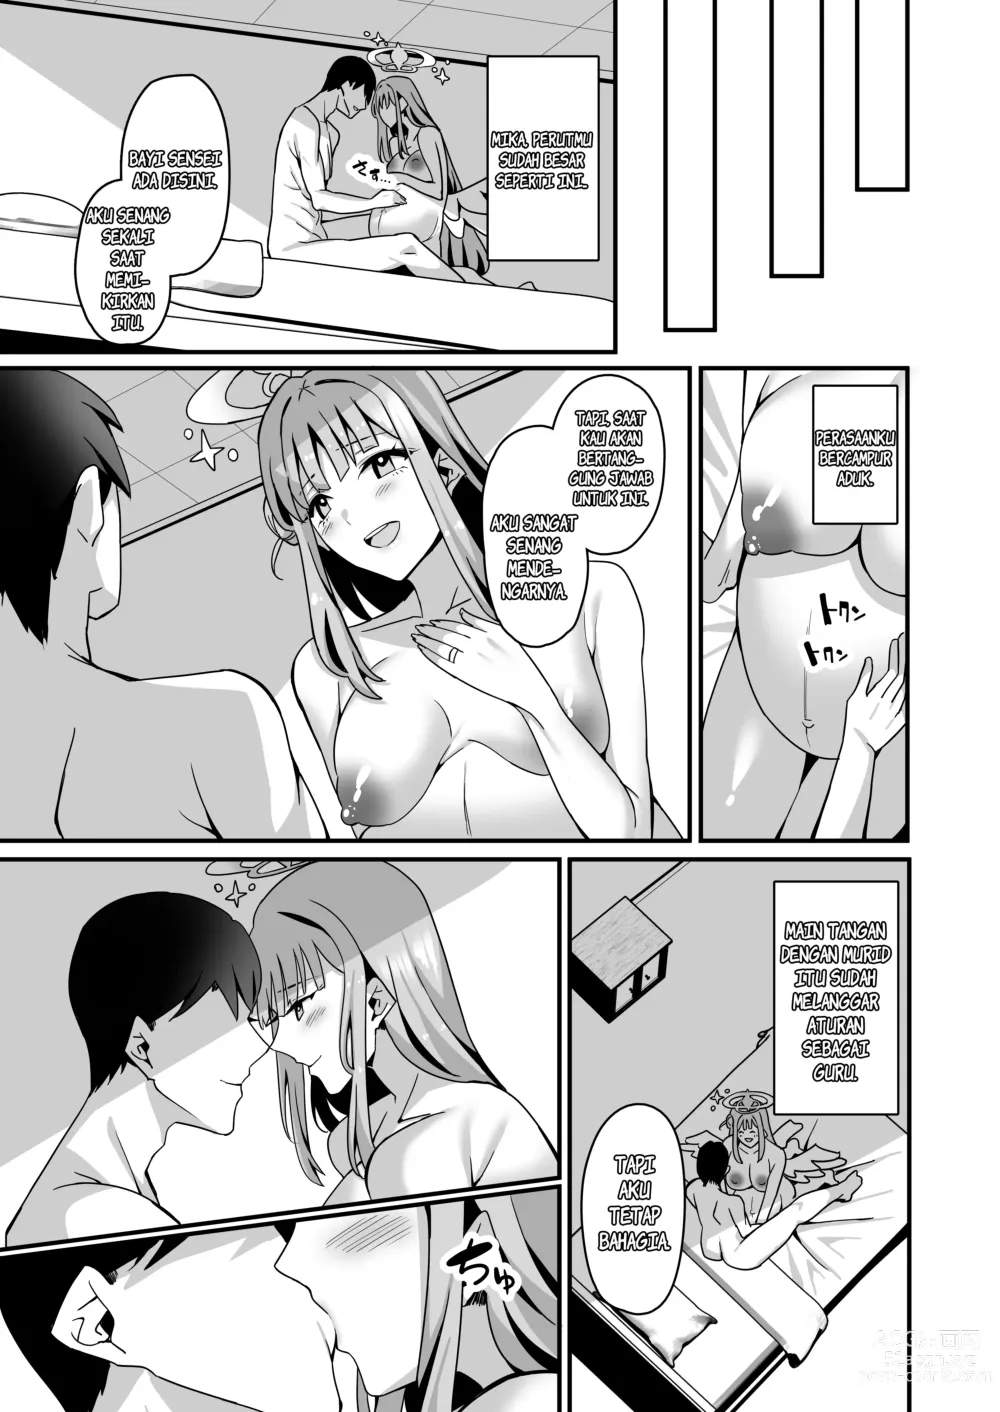 Page 26 of doujinshi Mika to Happy Love Love Sex Shite Haramaseru Hon - A book about happy loving sex with Mika and impregnation.